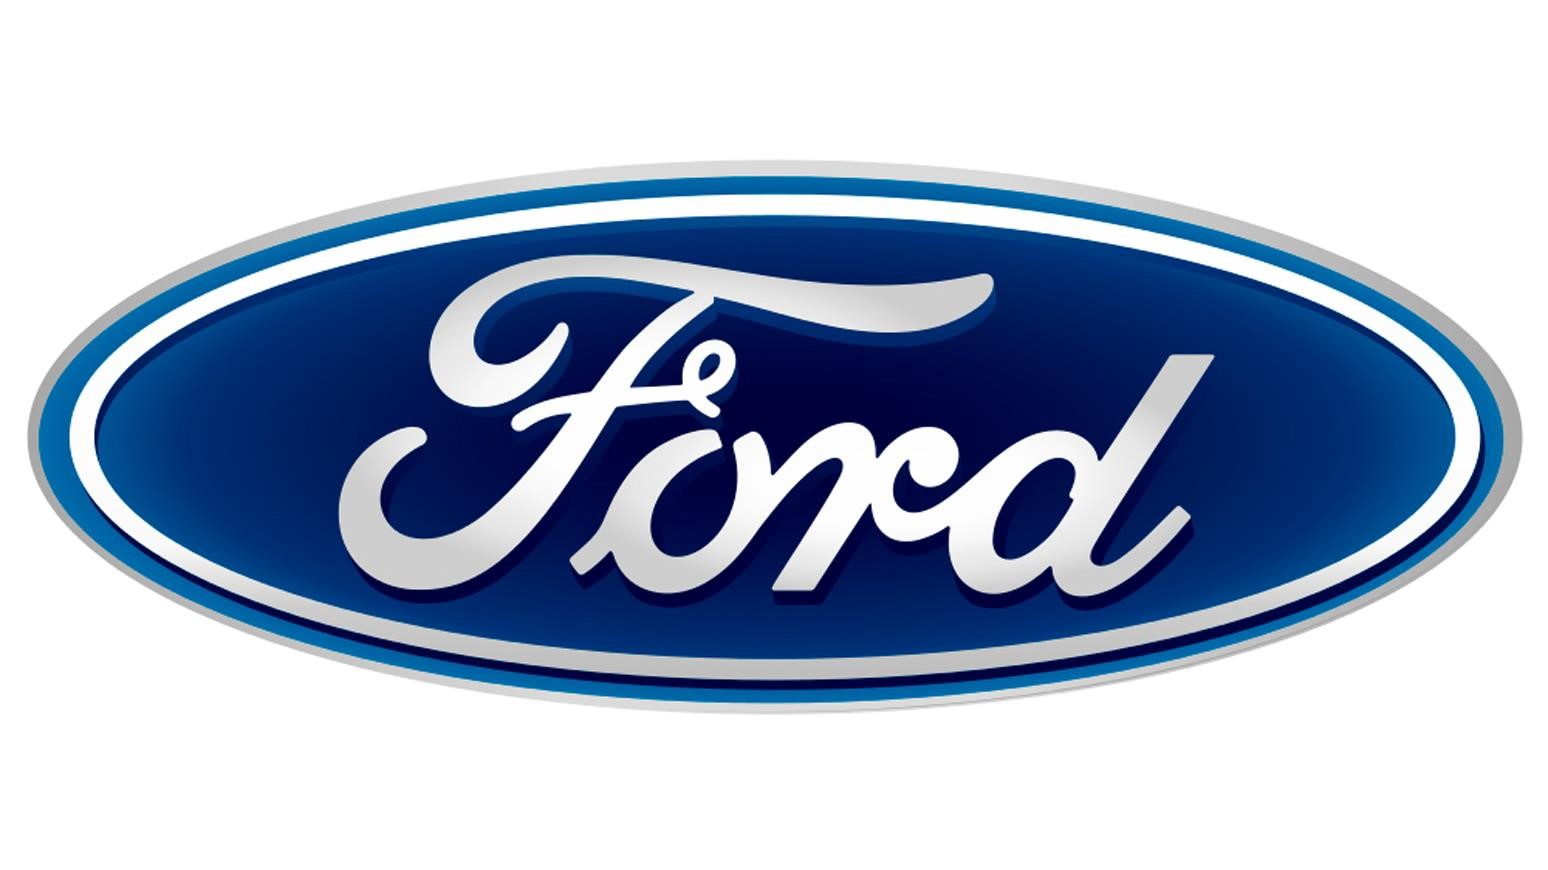 Ford City Data Report Used To Predict Locations Of Future Traffic Accidents